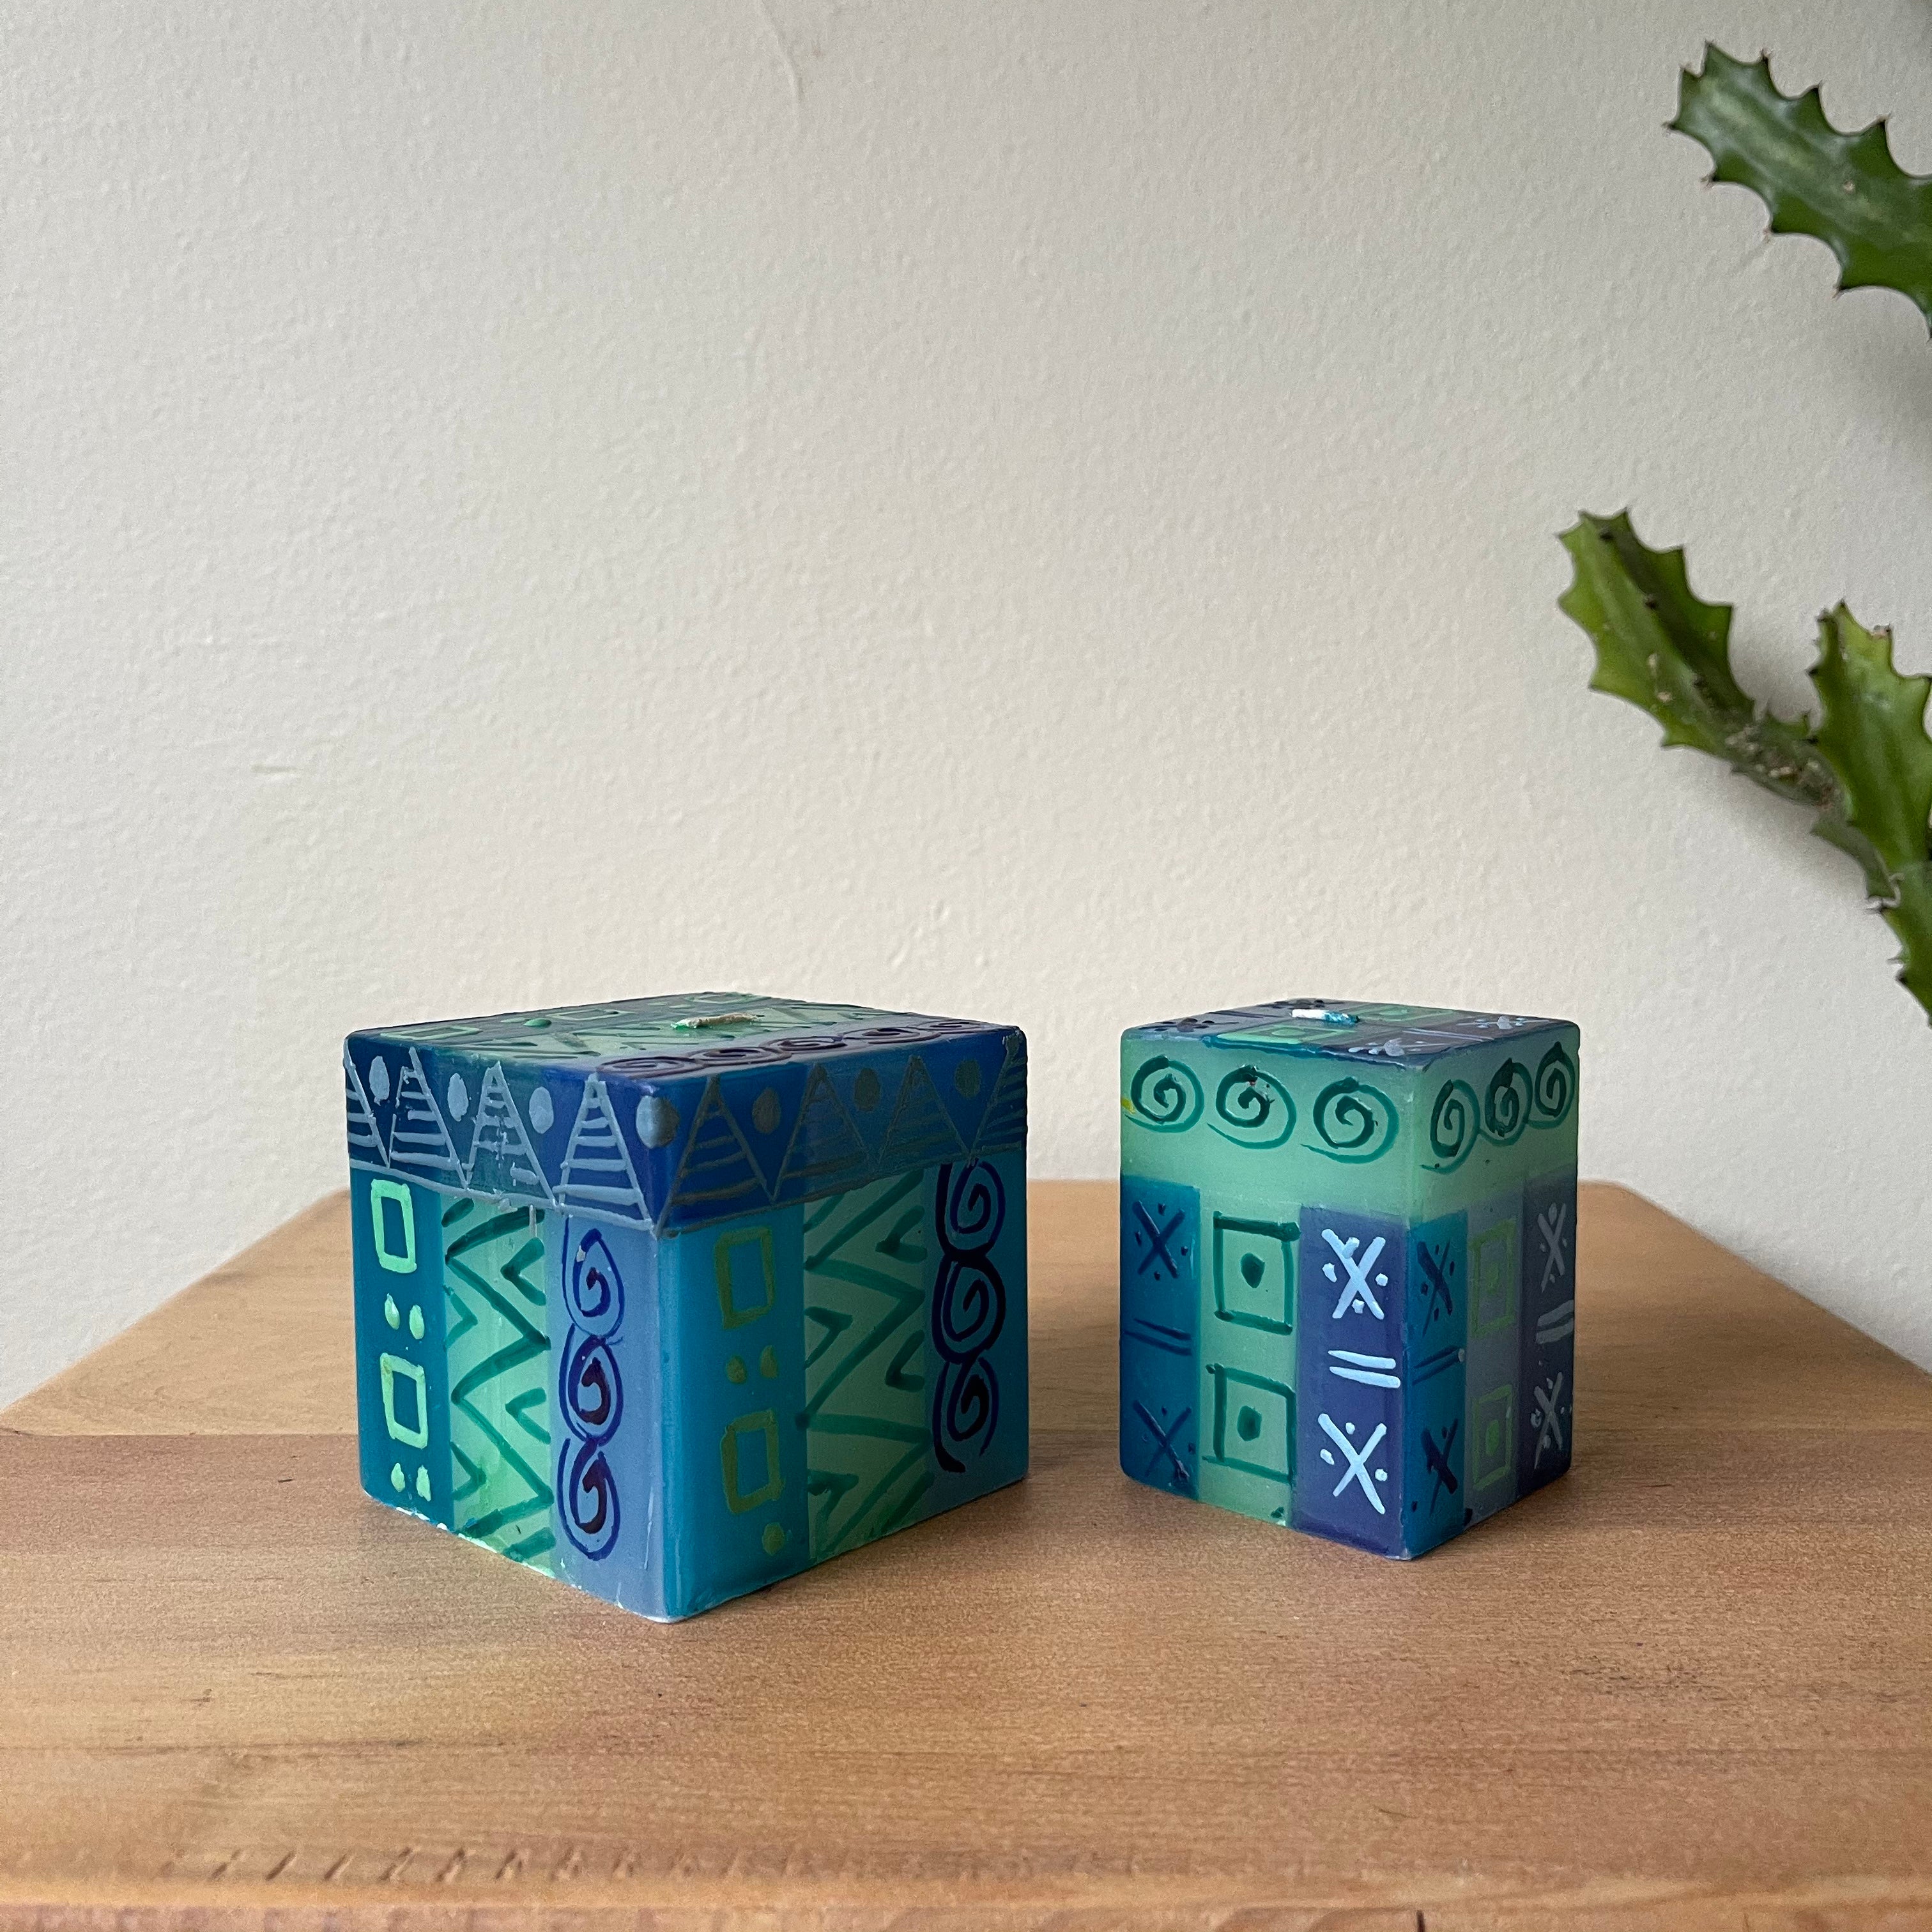 Blue & Green hand painted candle cubes.  3" x 3" x 3"cube and 2" x 2" x 3" cube.  Painted in a blue & green pattern with white highlights.